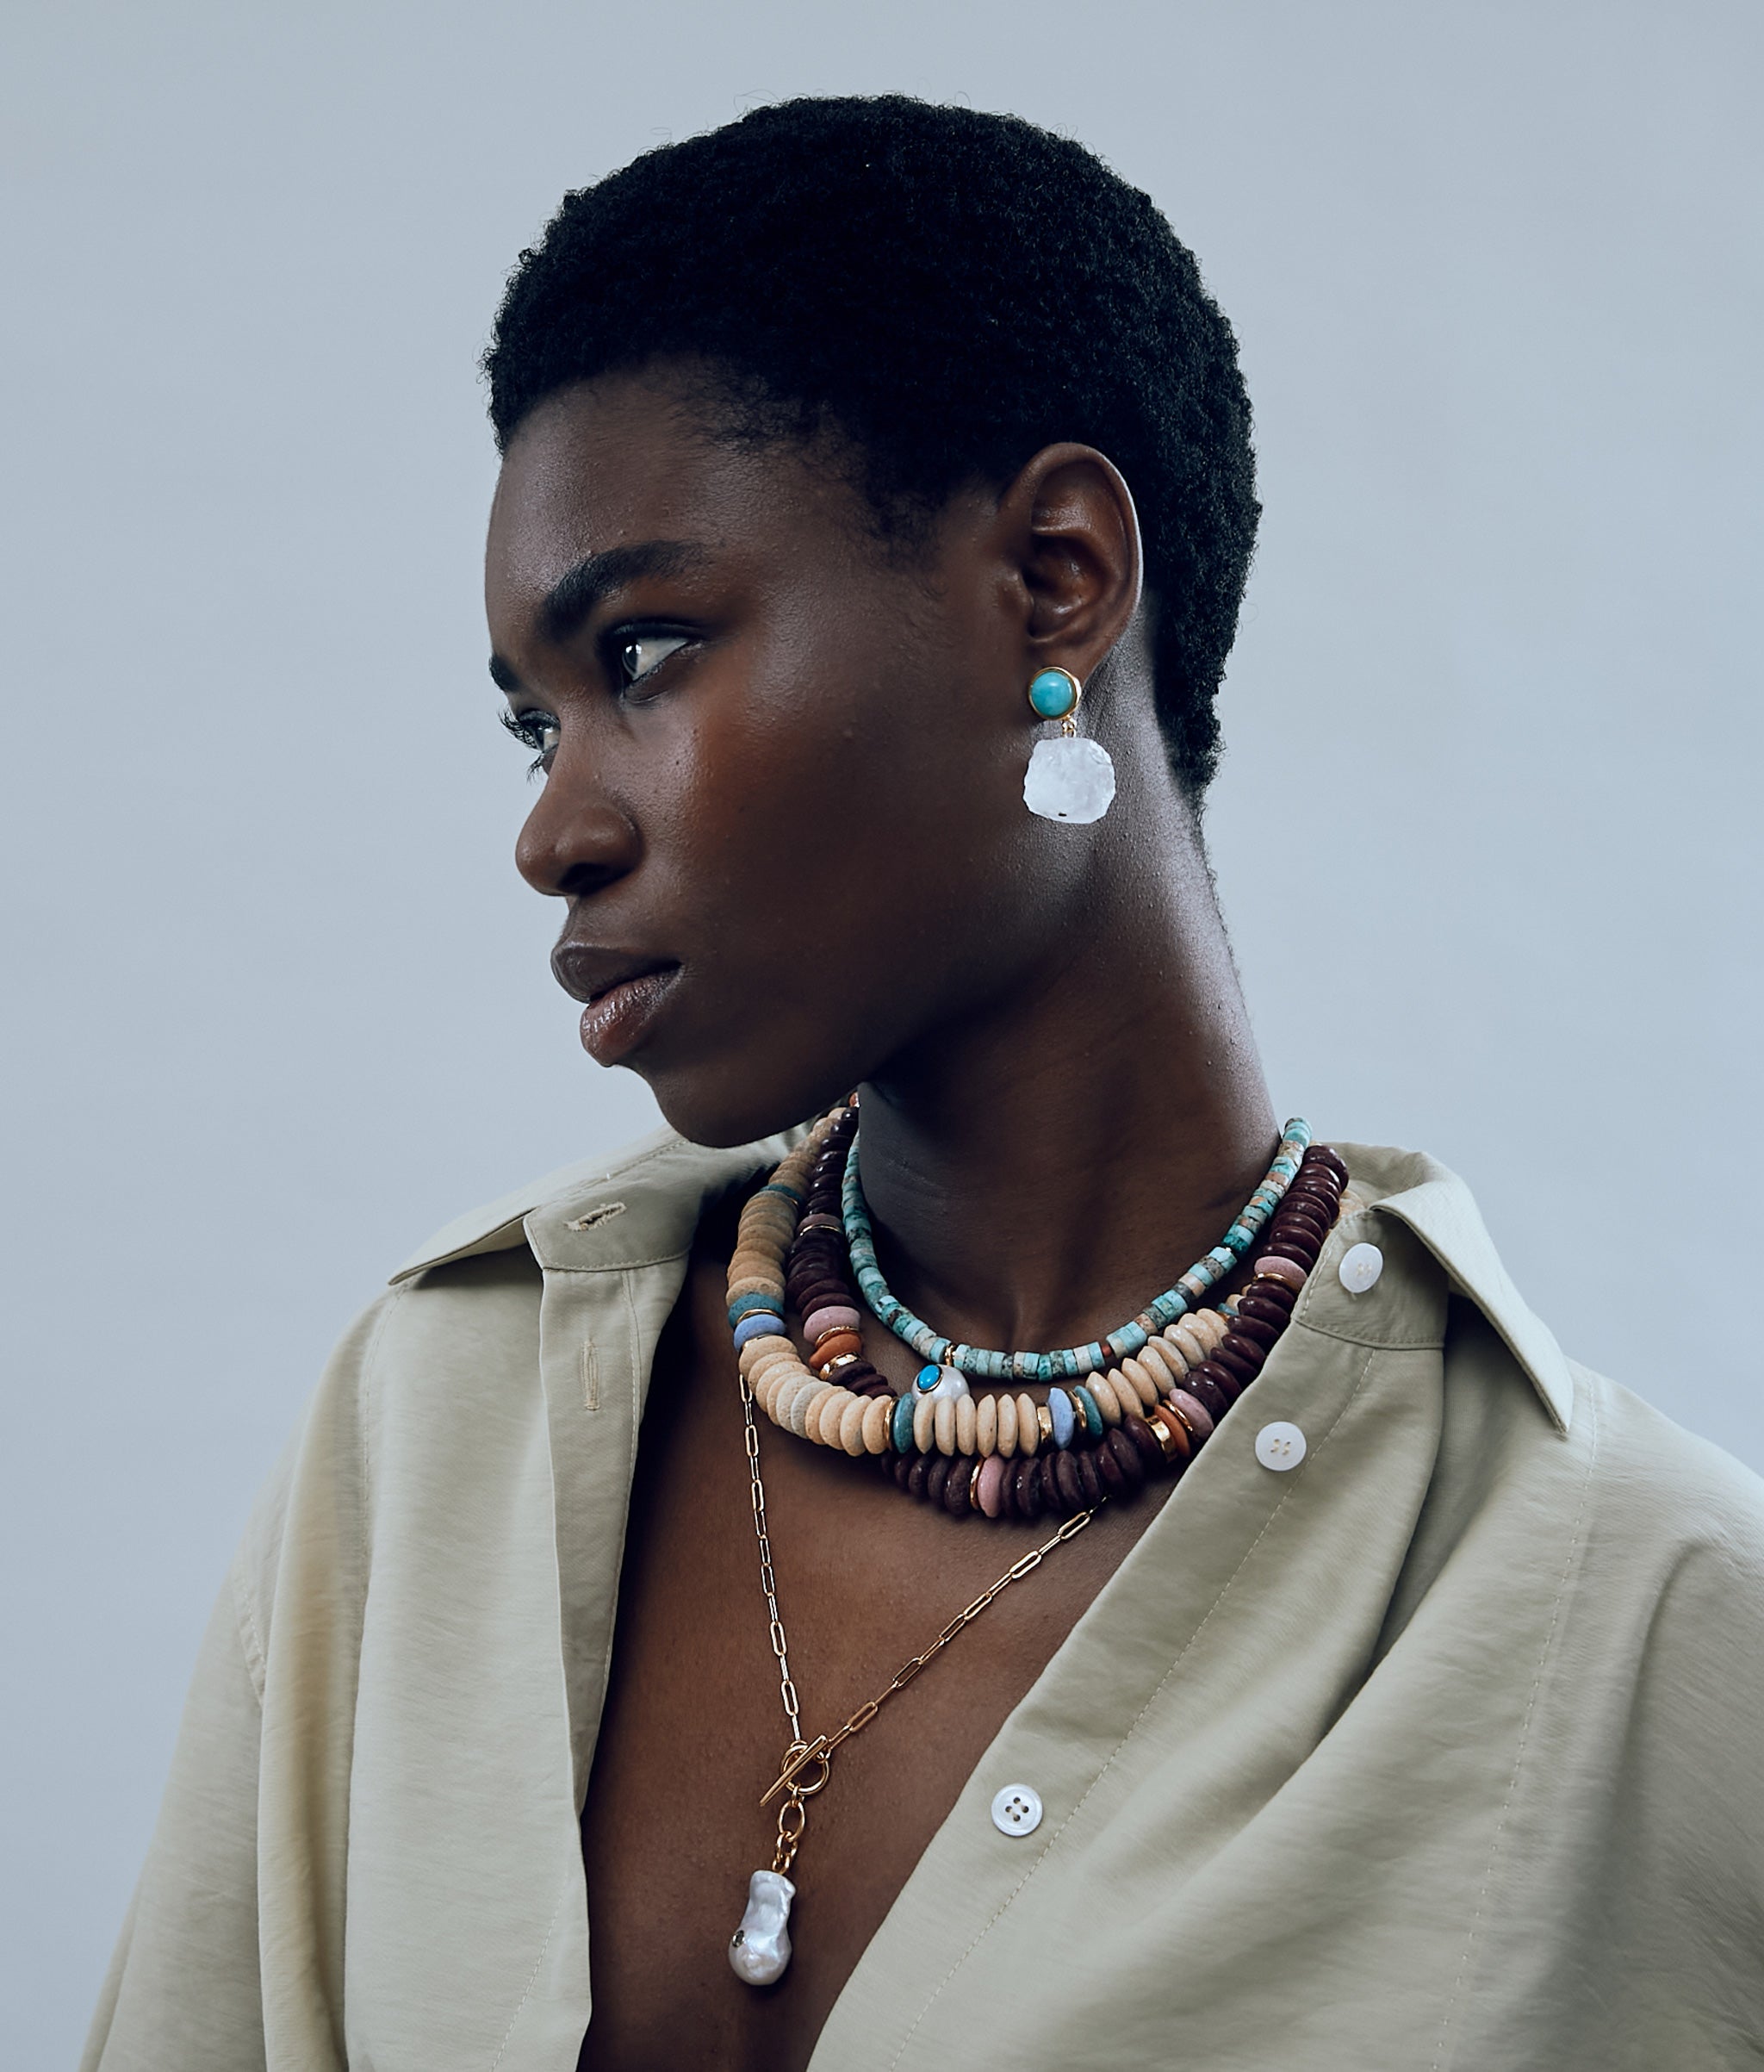 Model on grey background wearing the Glacier Bay Earrings in Rock Crystal with a myriad of colorful, chunky necklaces.